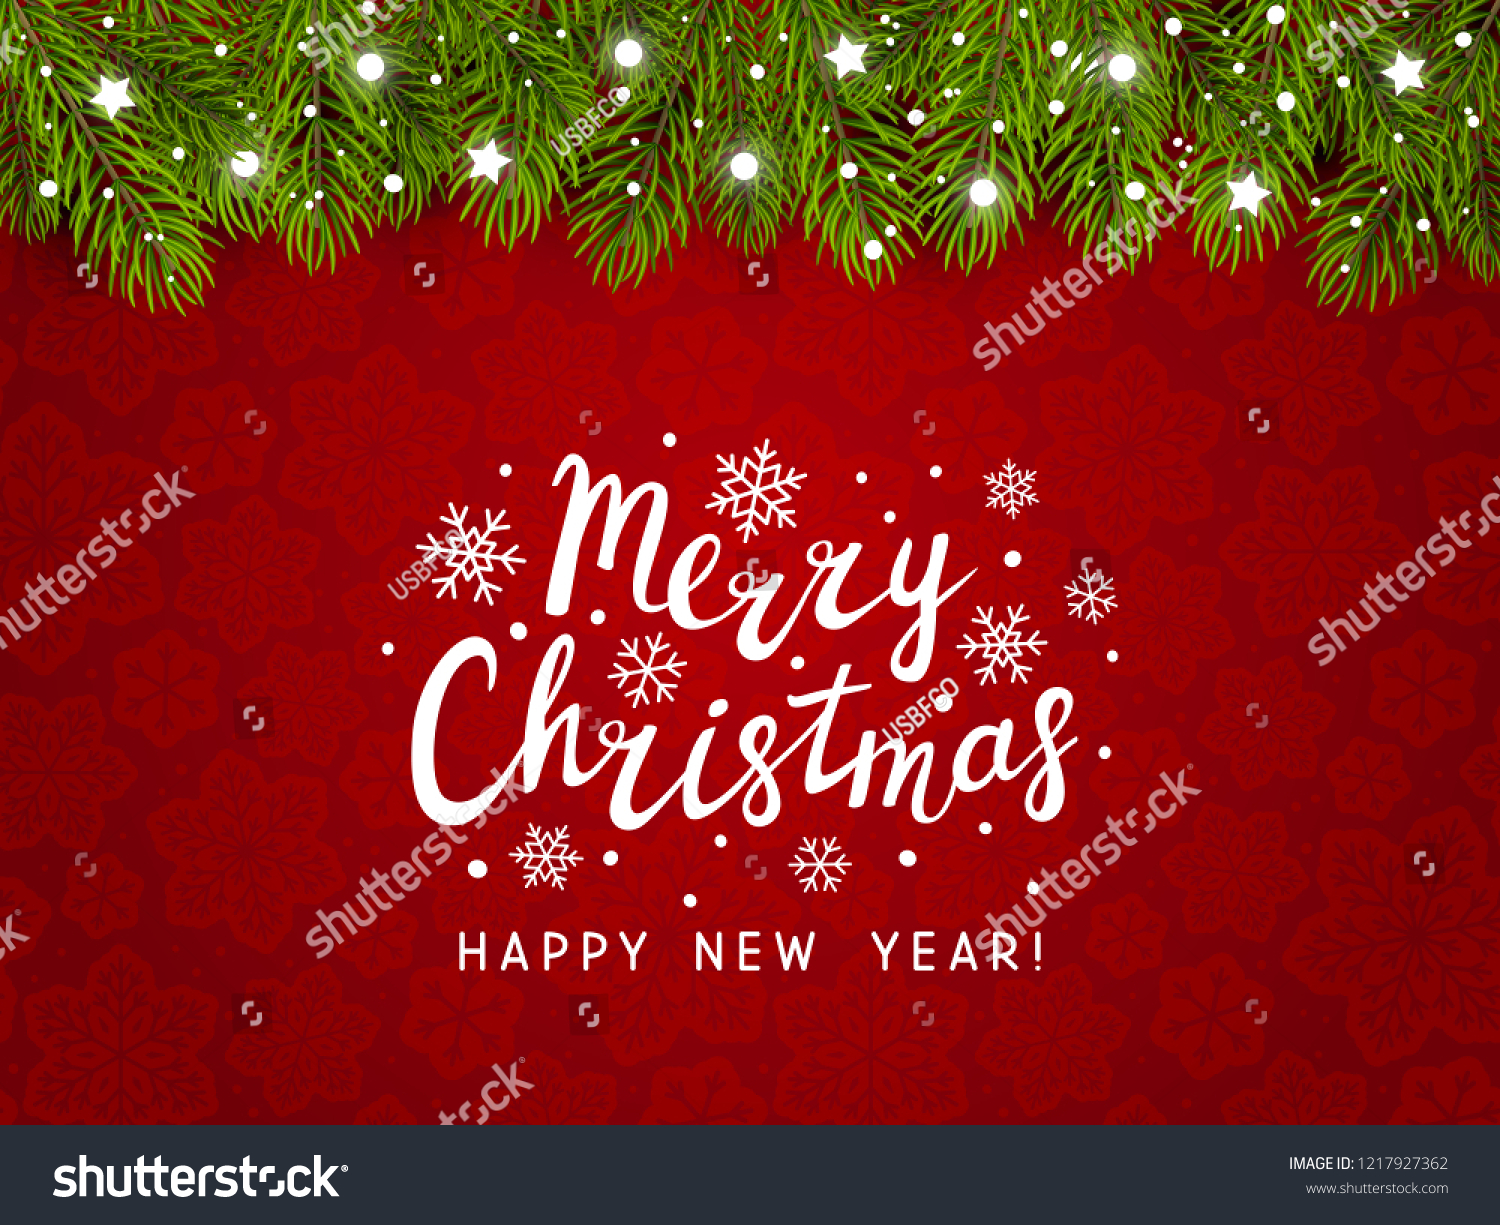 Red green christmas backgrounds images stock photos vectors